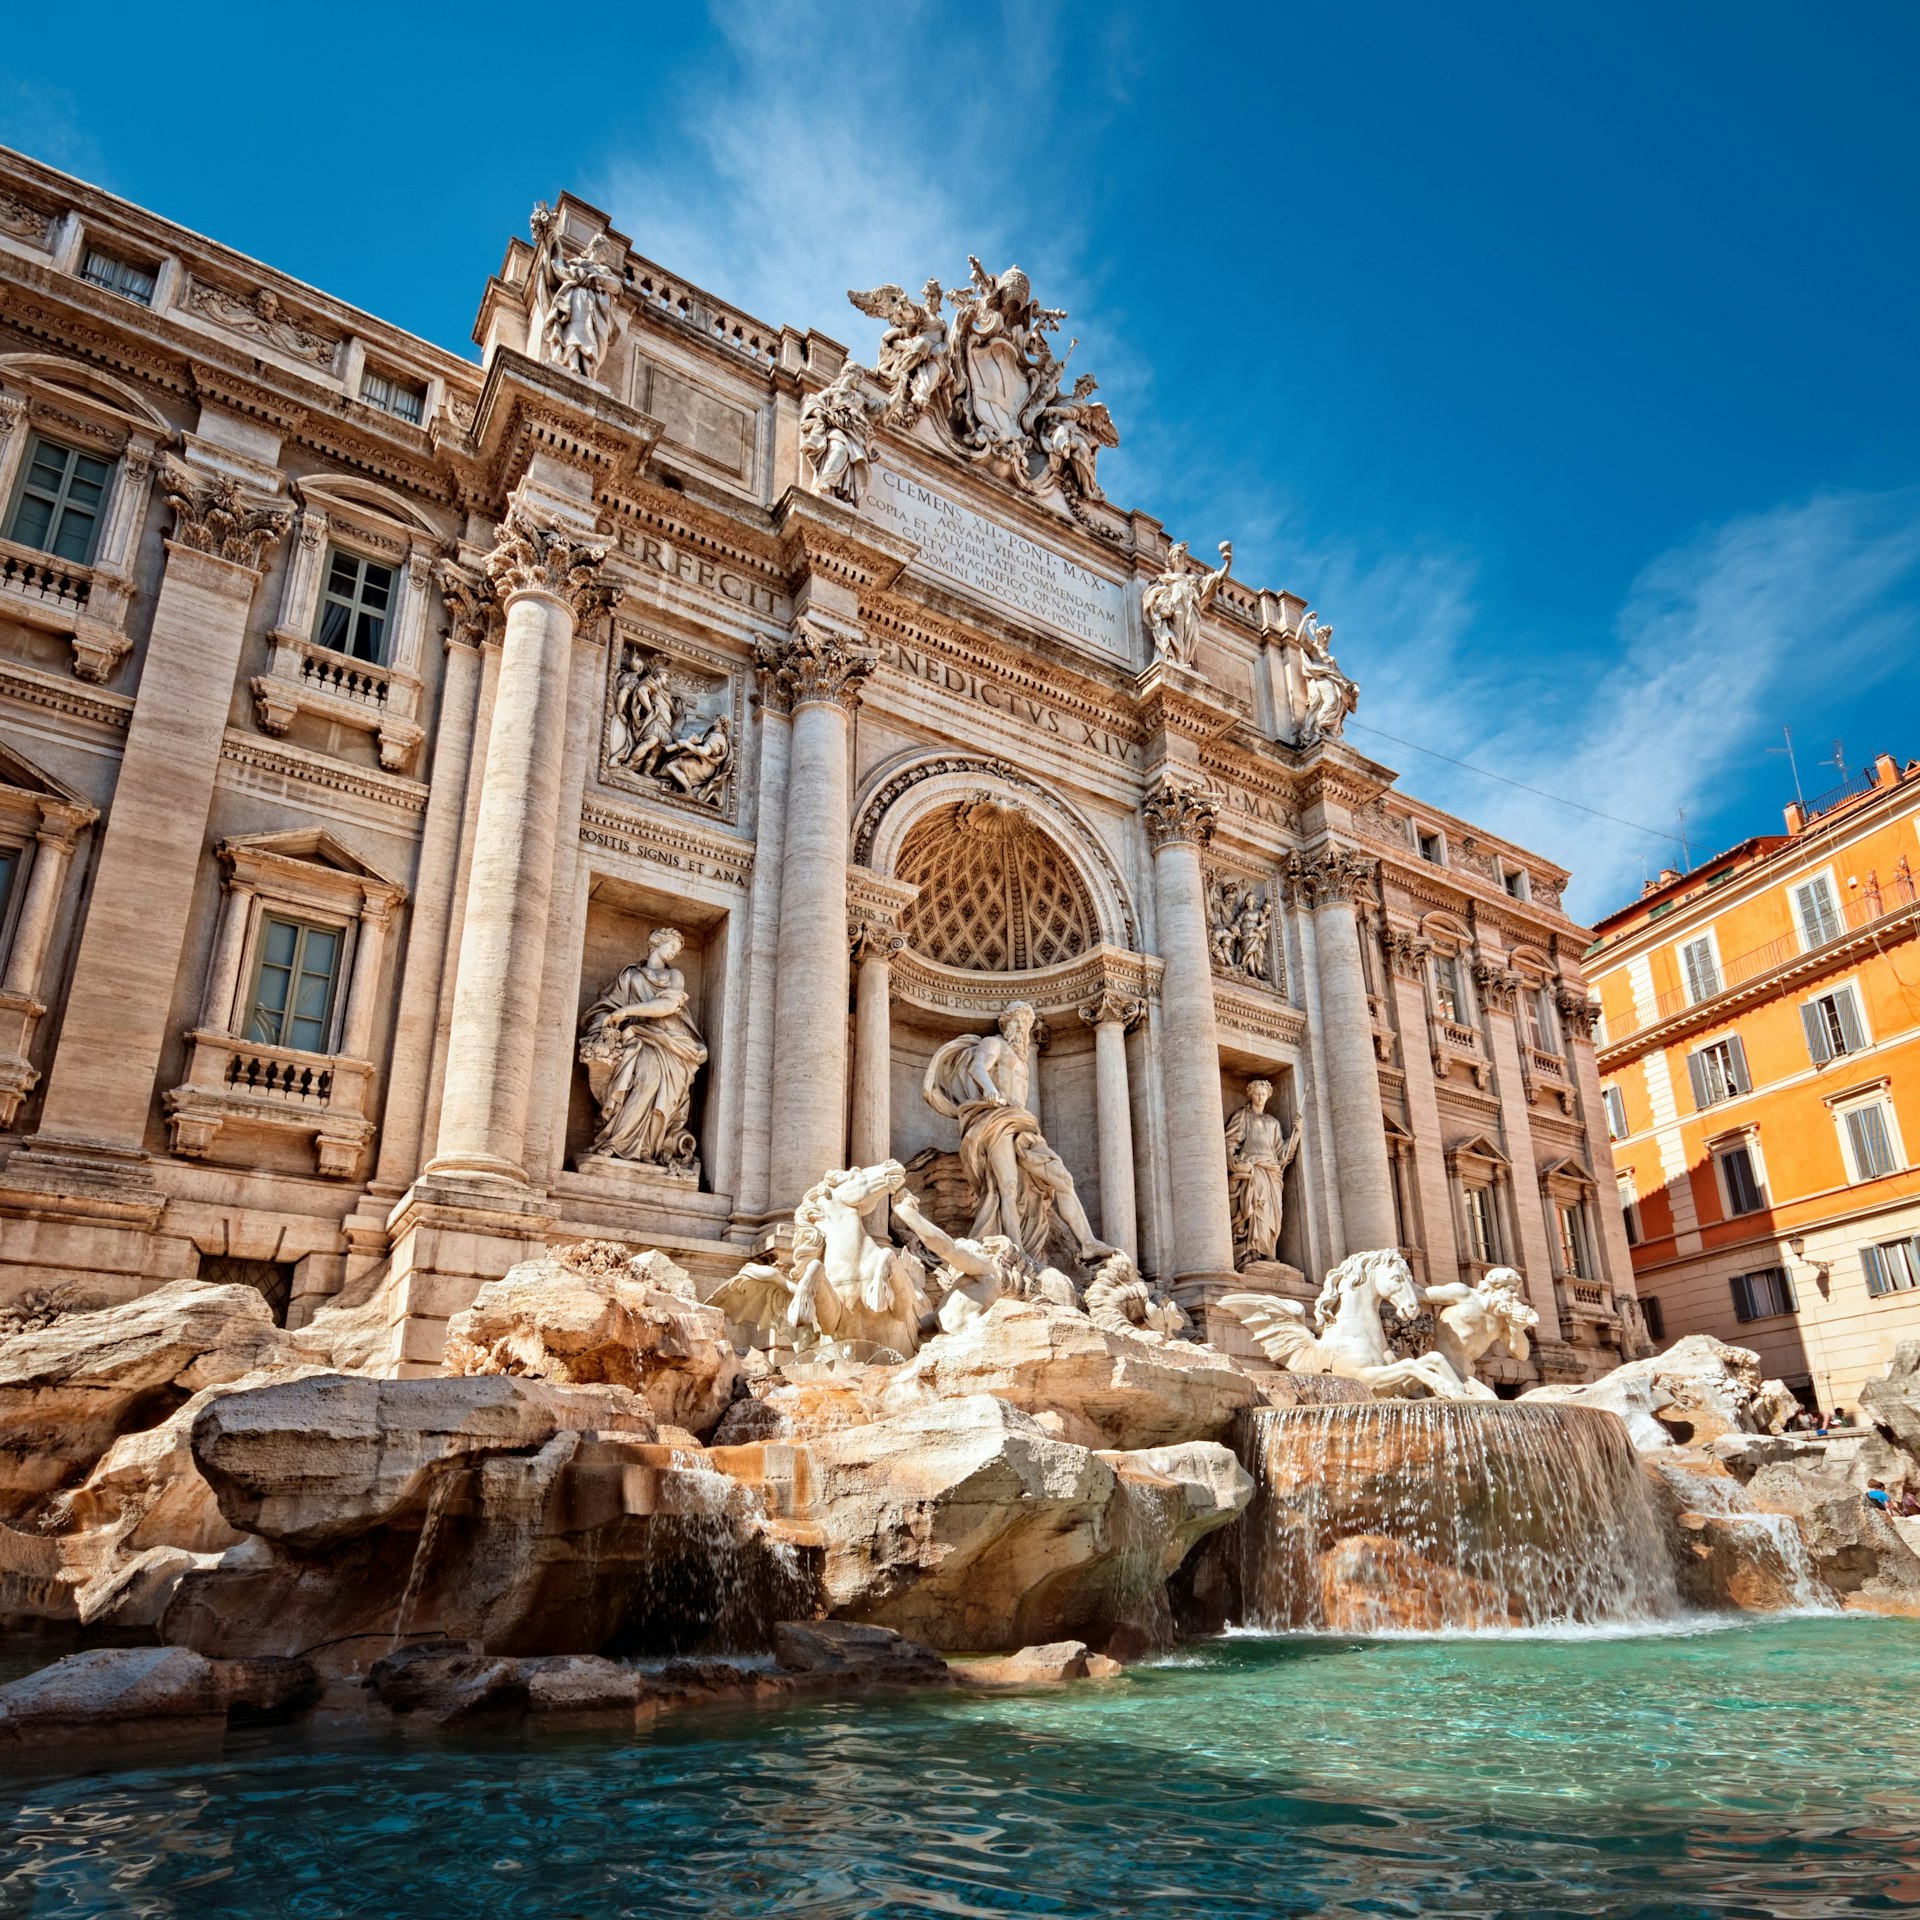 The Trevi fountain in Rome Italy during the day